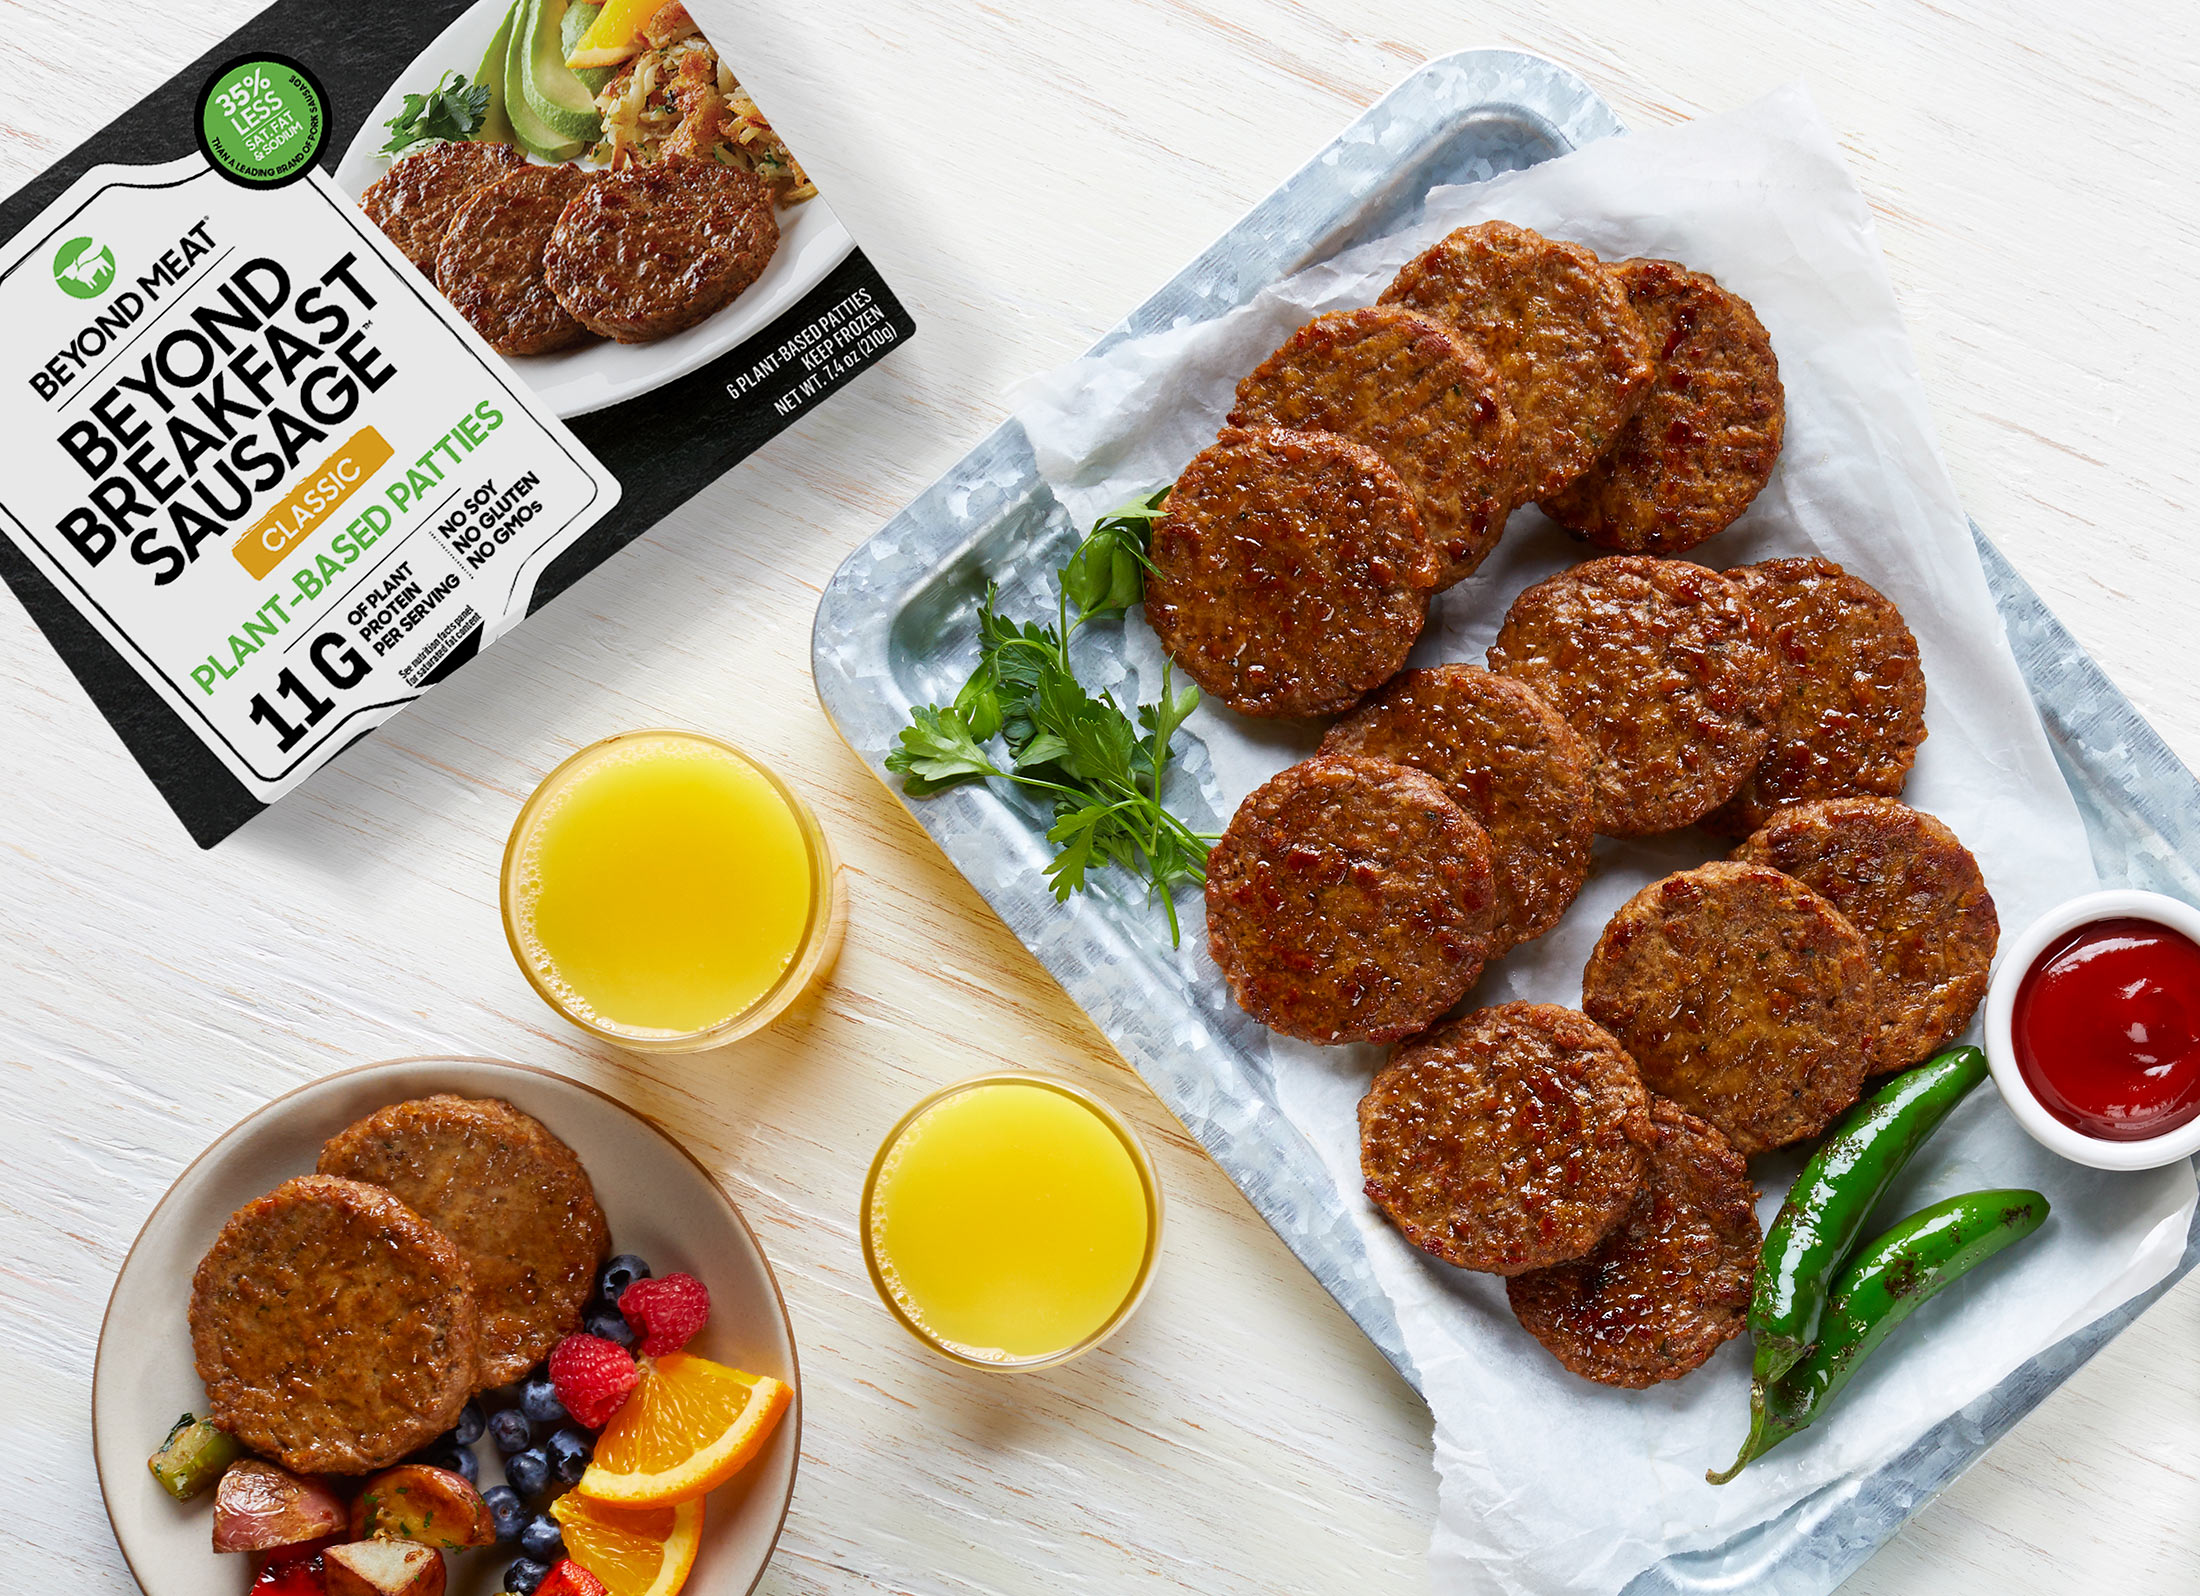 What the cluck? Vegan brands are making big money from silly-sounding fake  meat